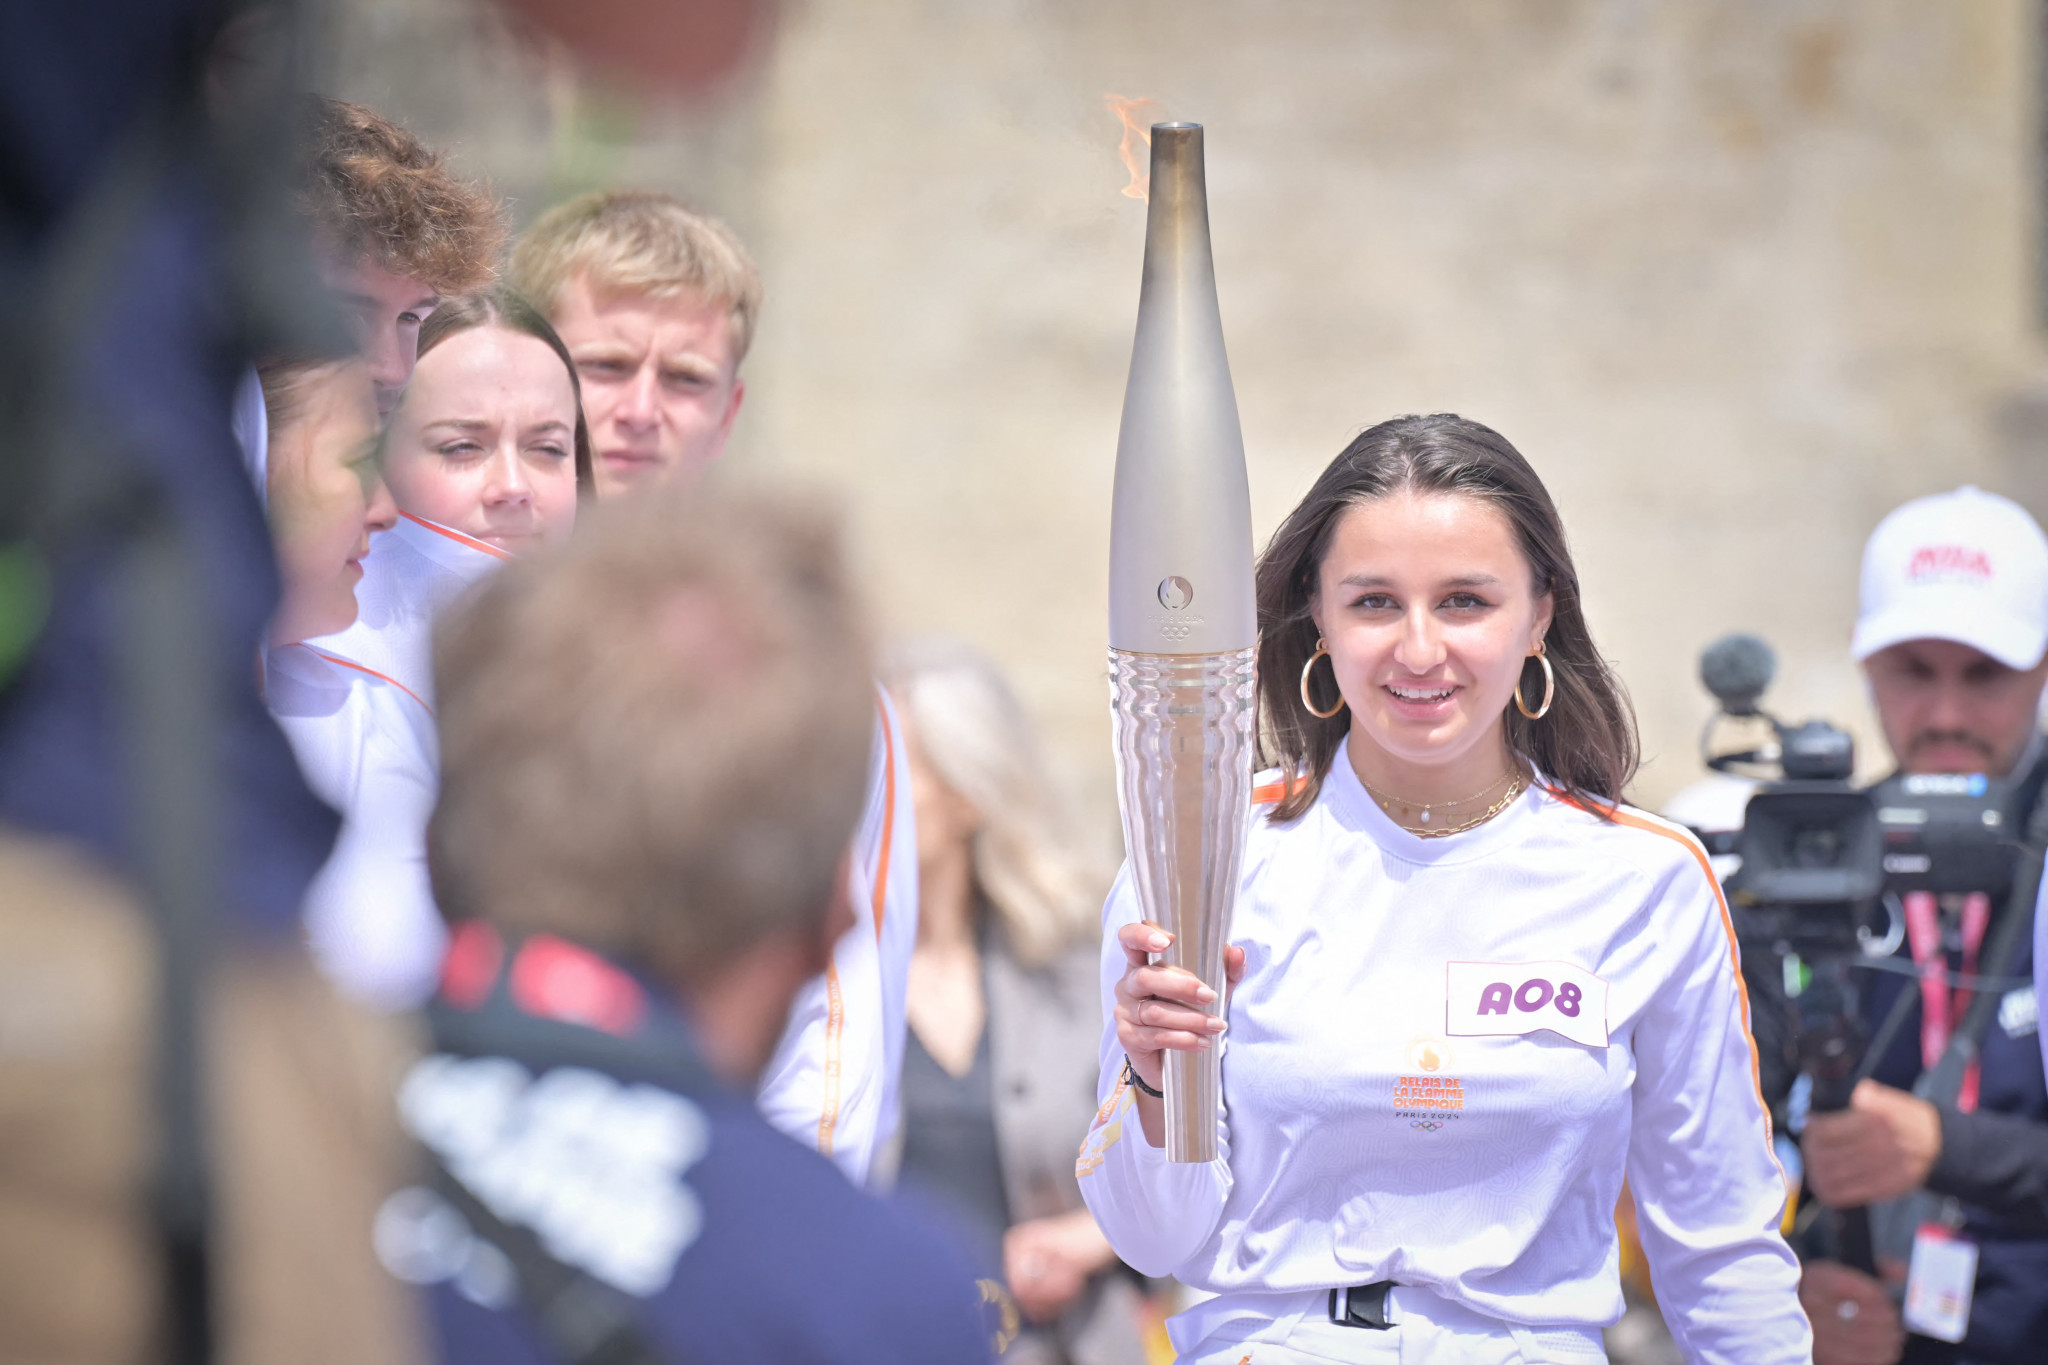 Torch bearer Fanny Rivallant holds the Olympic flame at Sainte-Mere-Eglise, Normandy. GETTY IMAGES